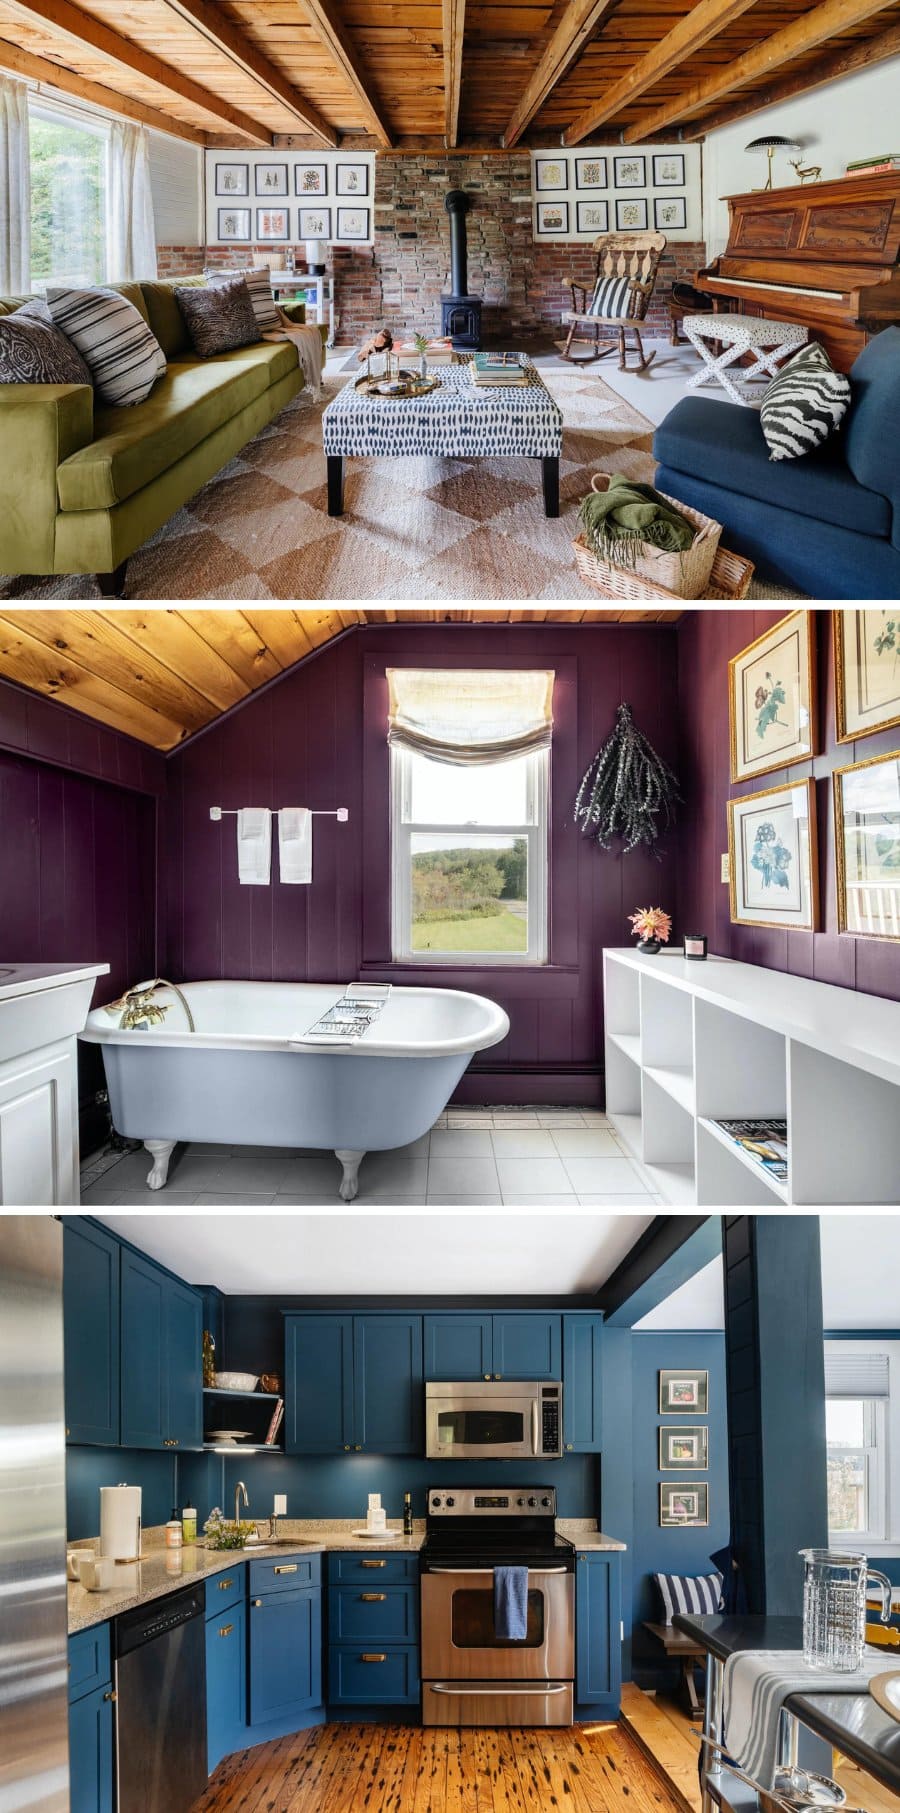 Interior of a colorful home in the Berkshires - purple bathroom and bright blue kitchen